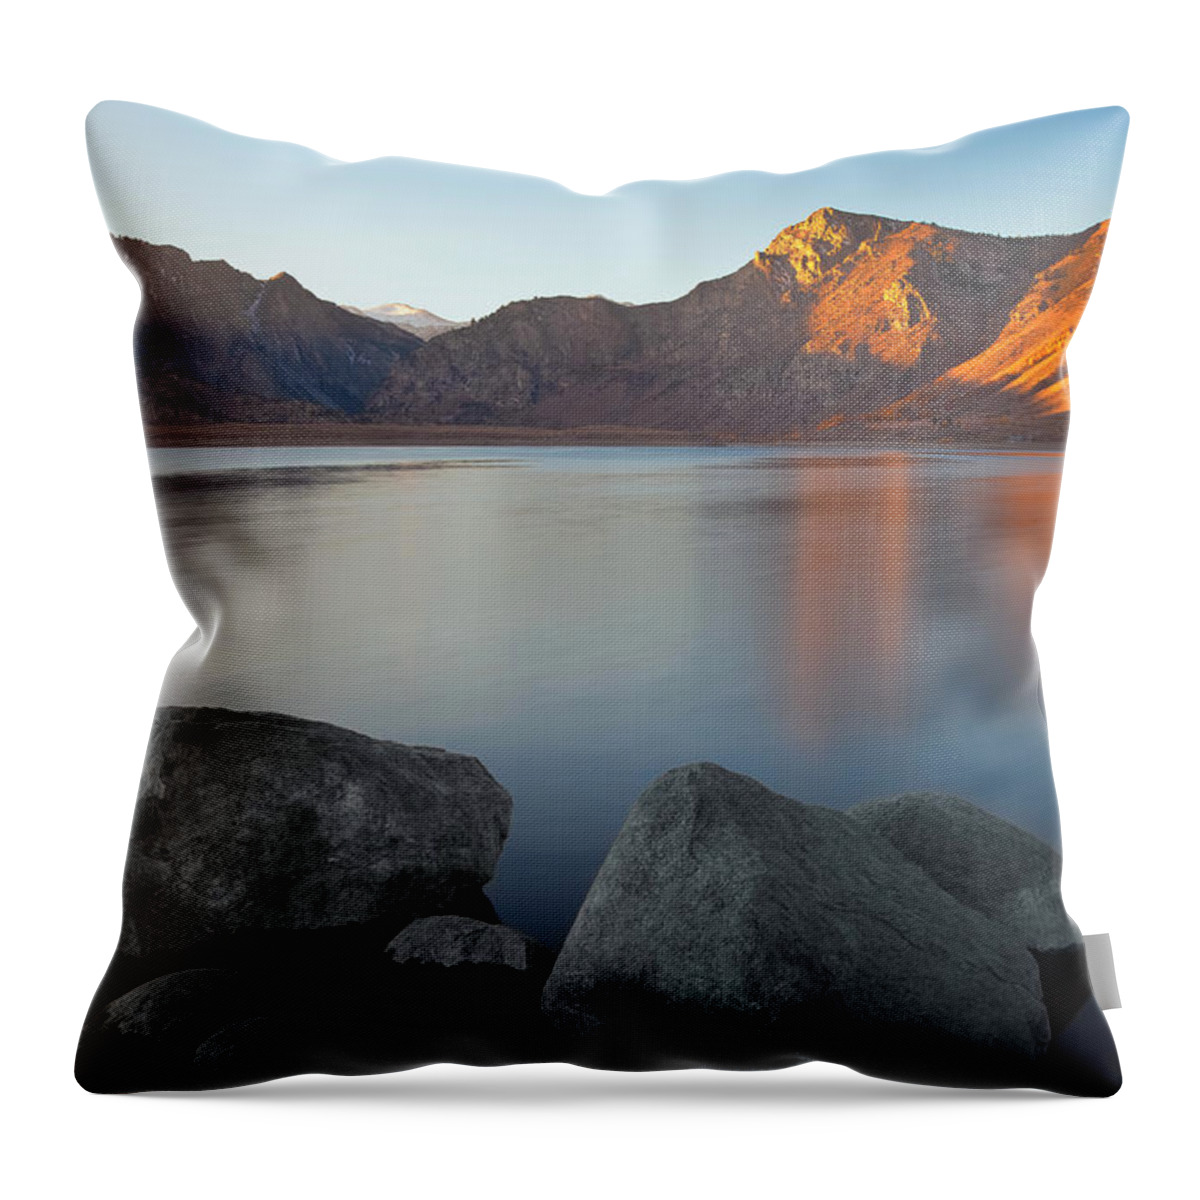 Landscape Throw Pillow featuring the photograph Serenity by Jonathan Nguyen